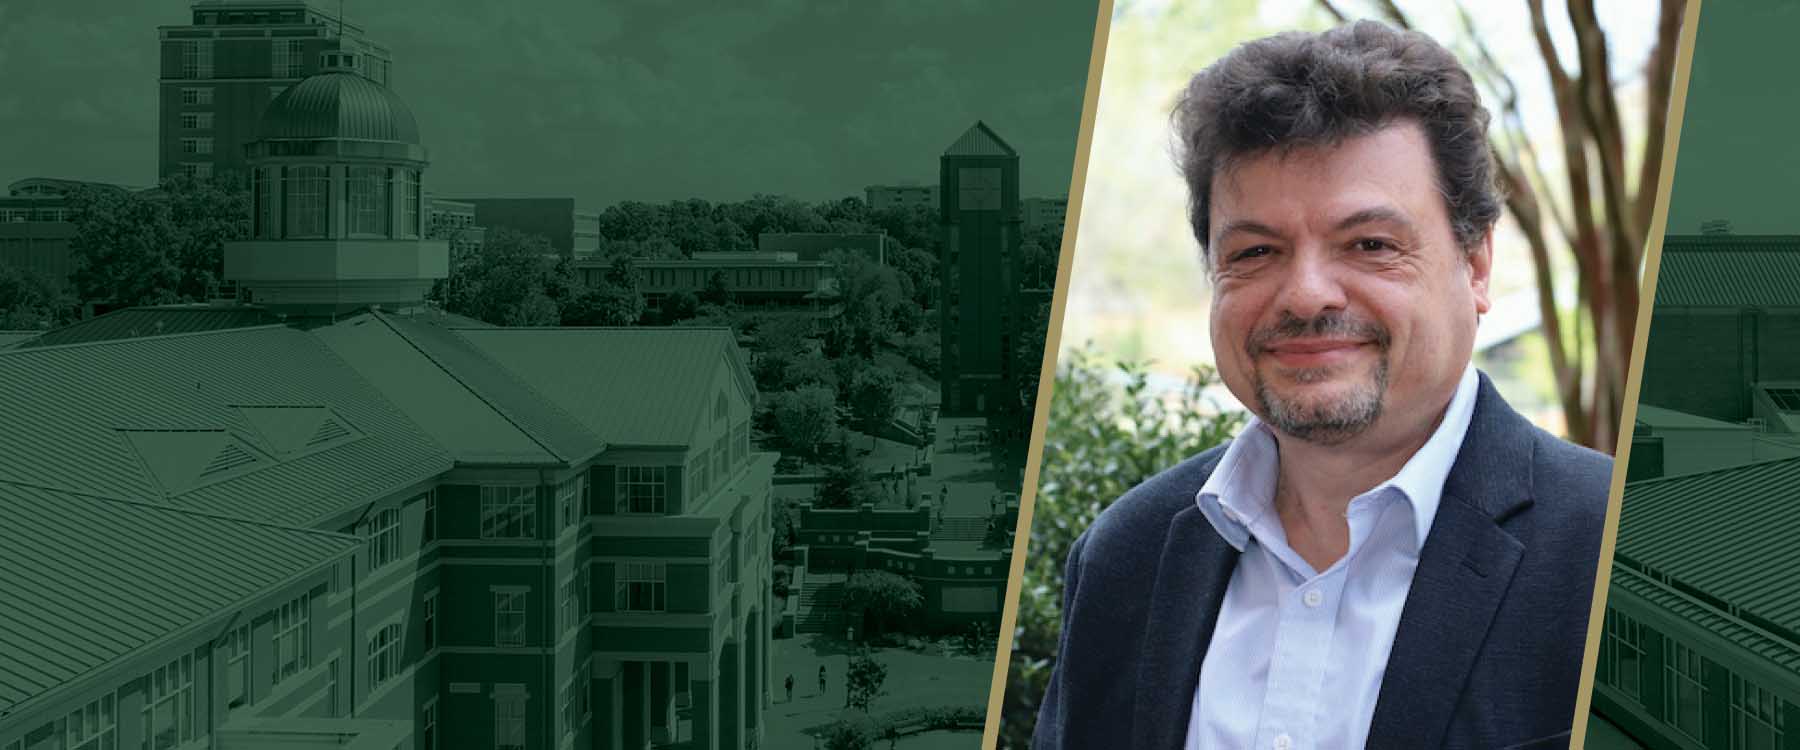 Bojan Cukic has been named dean for the College of Computing and Informatics, effective Dec. 1. Cukic has served UNC Charlotte for eight years, most recently as interim dean of the College of Computing and Informatics.